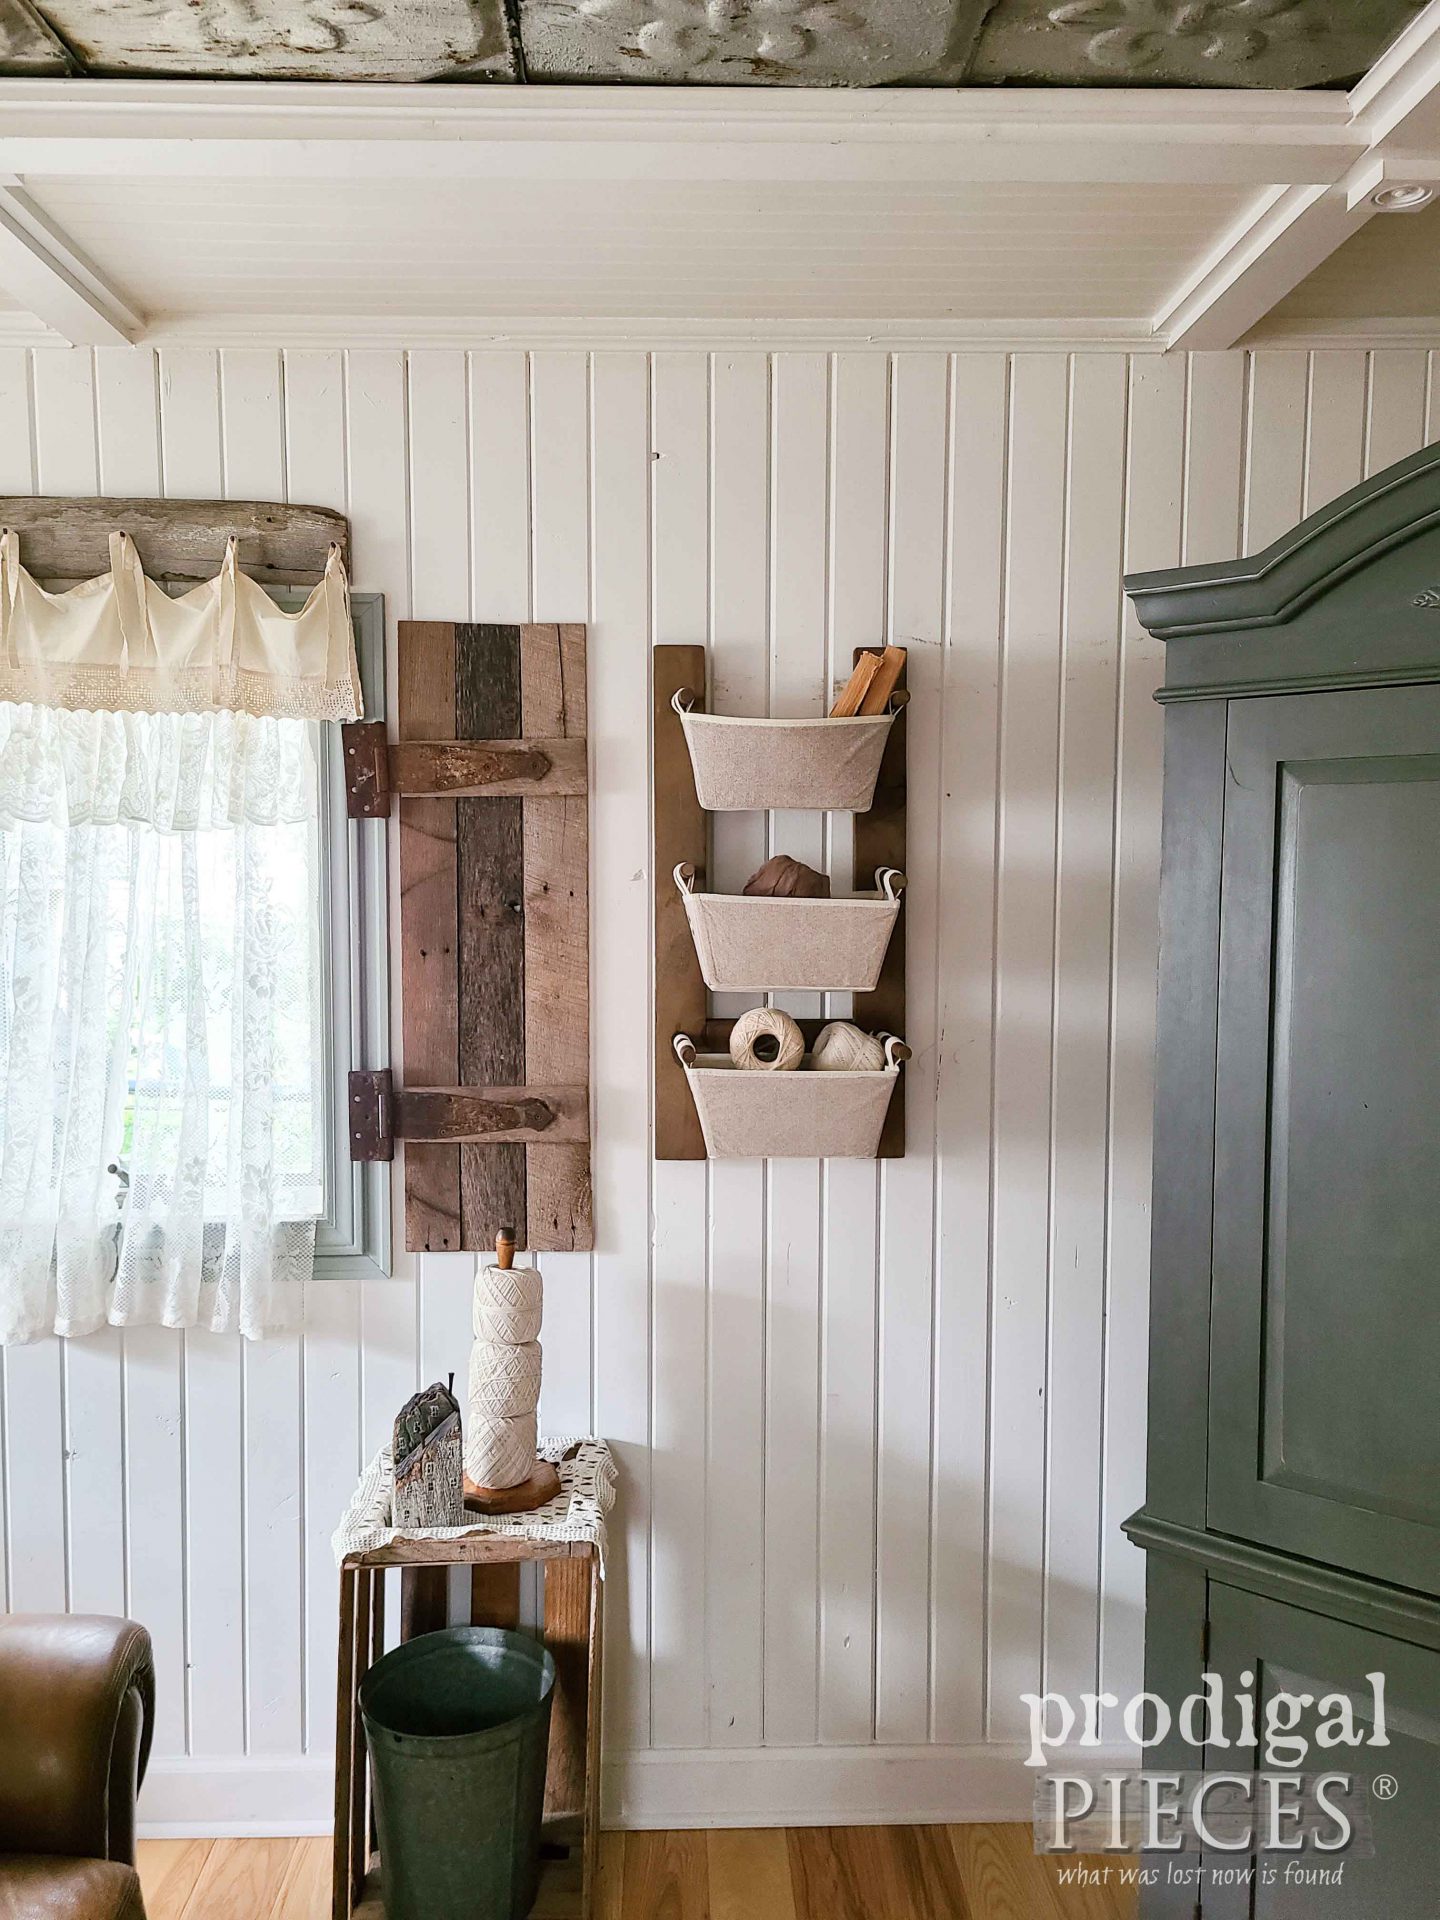 DIY Reclaimed Wood Storage Rack with Upcycled Spindles by Larissa of Prodigal Pieces | prodigalpieces.com #prodigalpieces #freeplans #farmhouse #diy